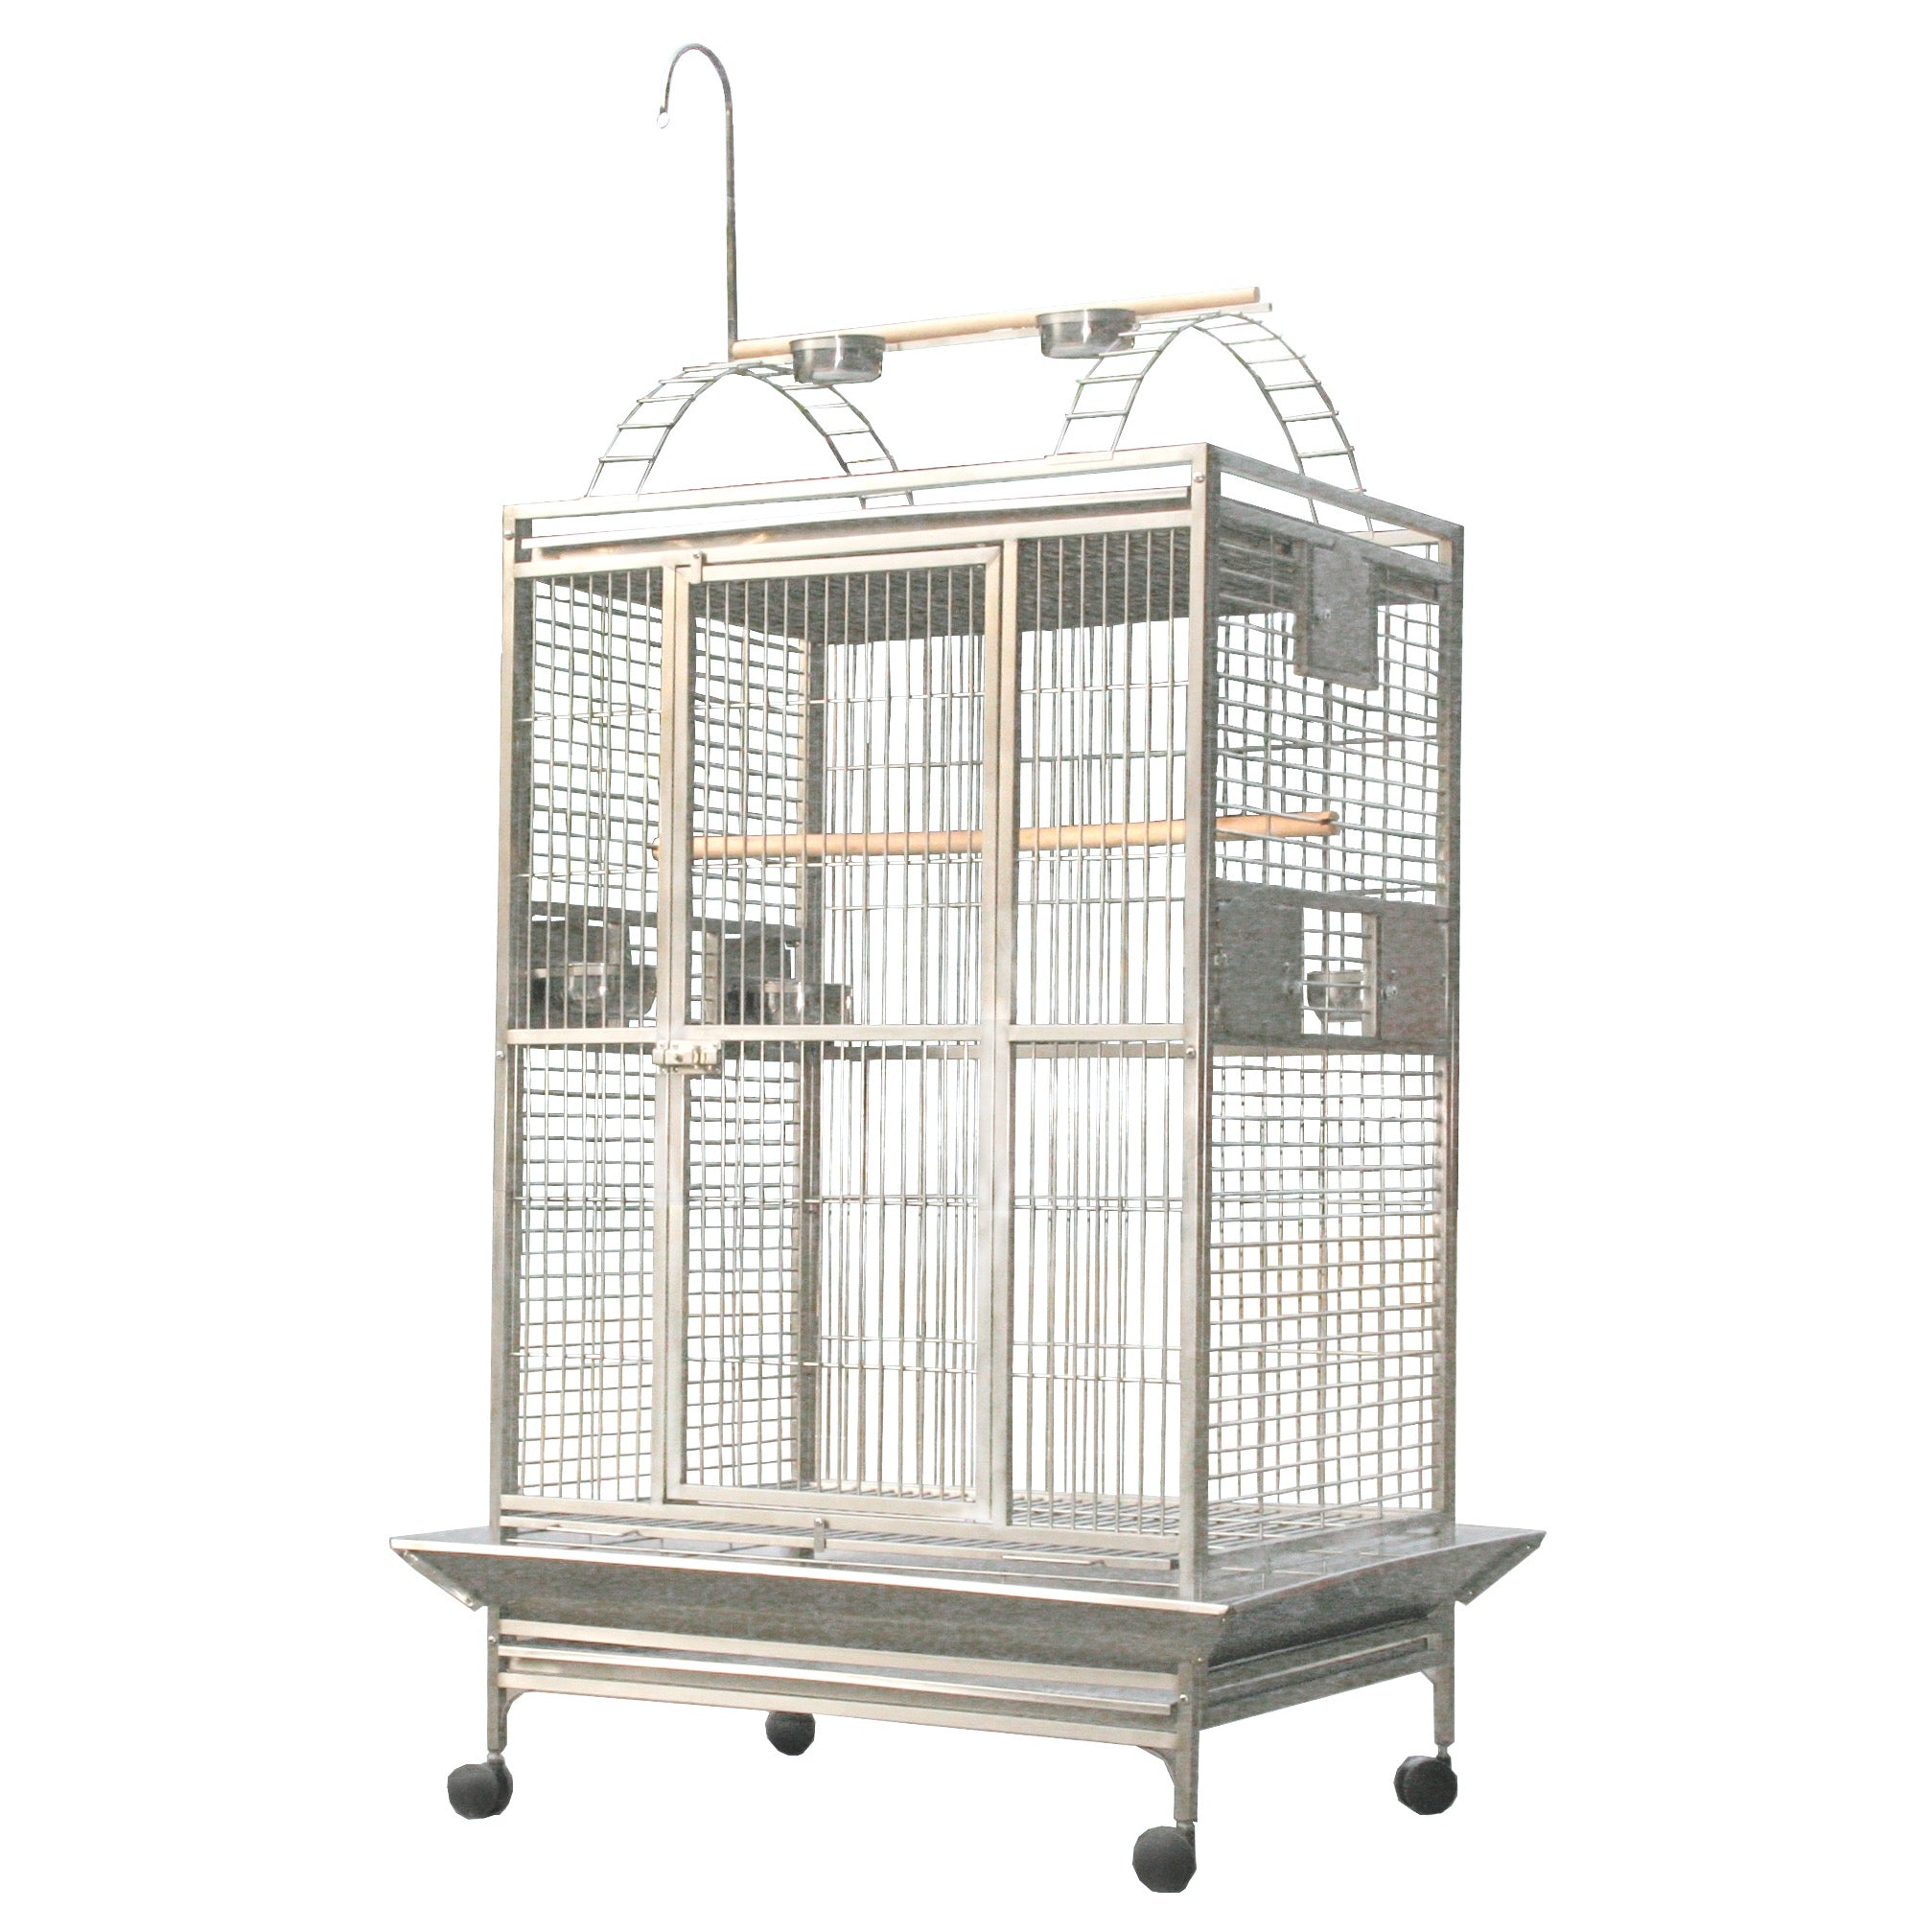 A&E Cage Co. 40"x30" Stainless Steel Imperial Play Top Bird Cage